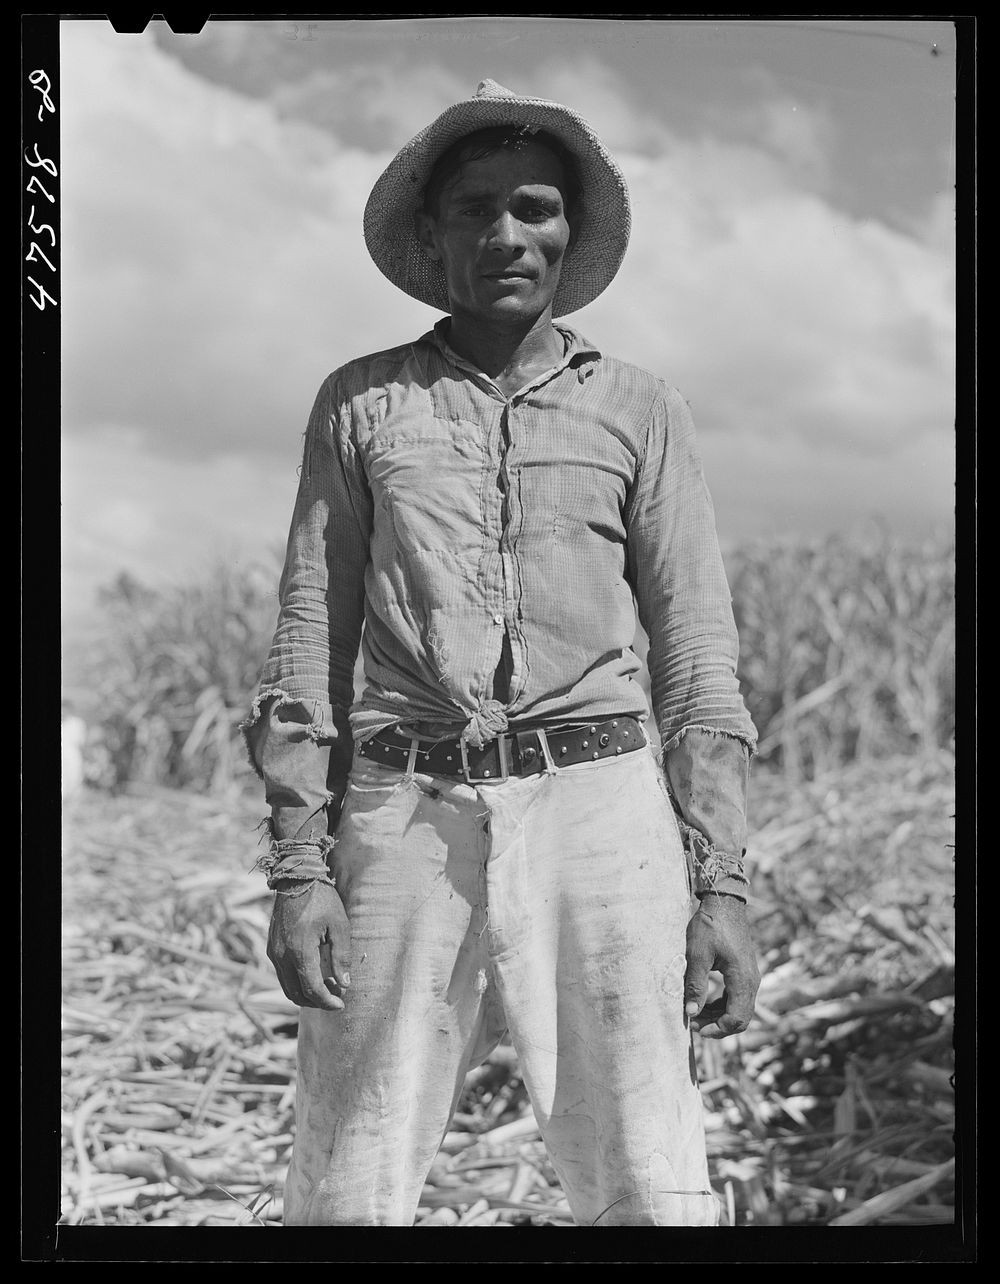 Guanica, Puerto Rico (vicinity). Ox cart driver employed in the sugar cane fields. Sourced from the Library of Congress.